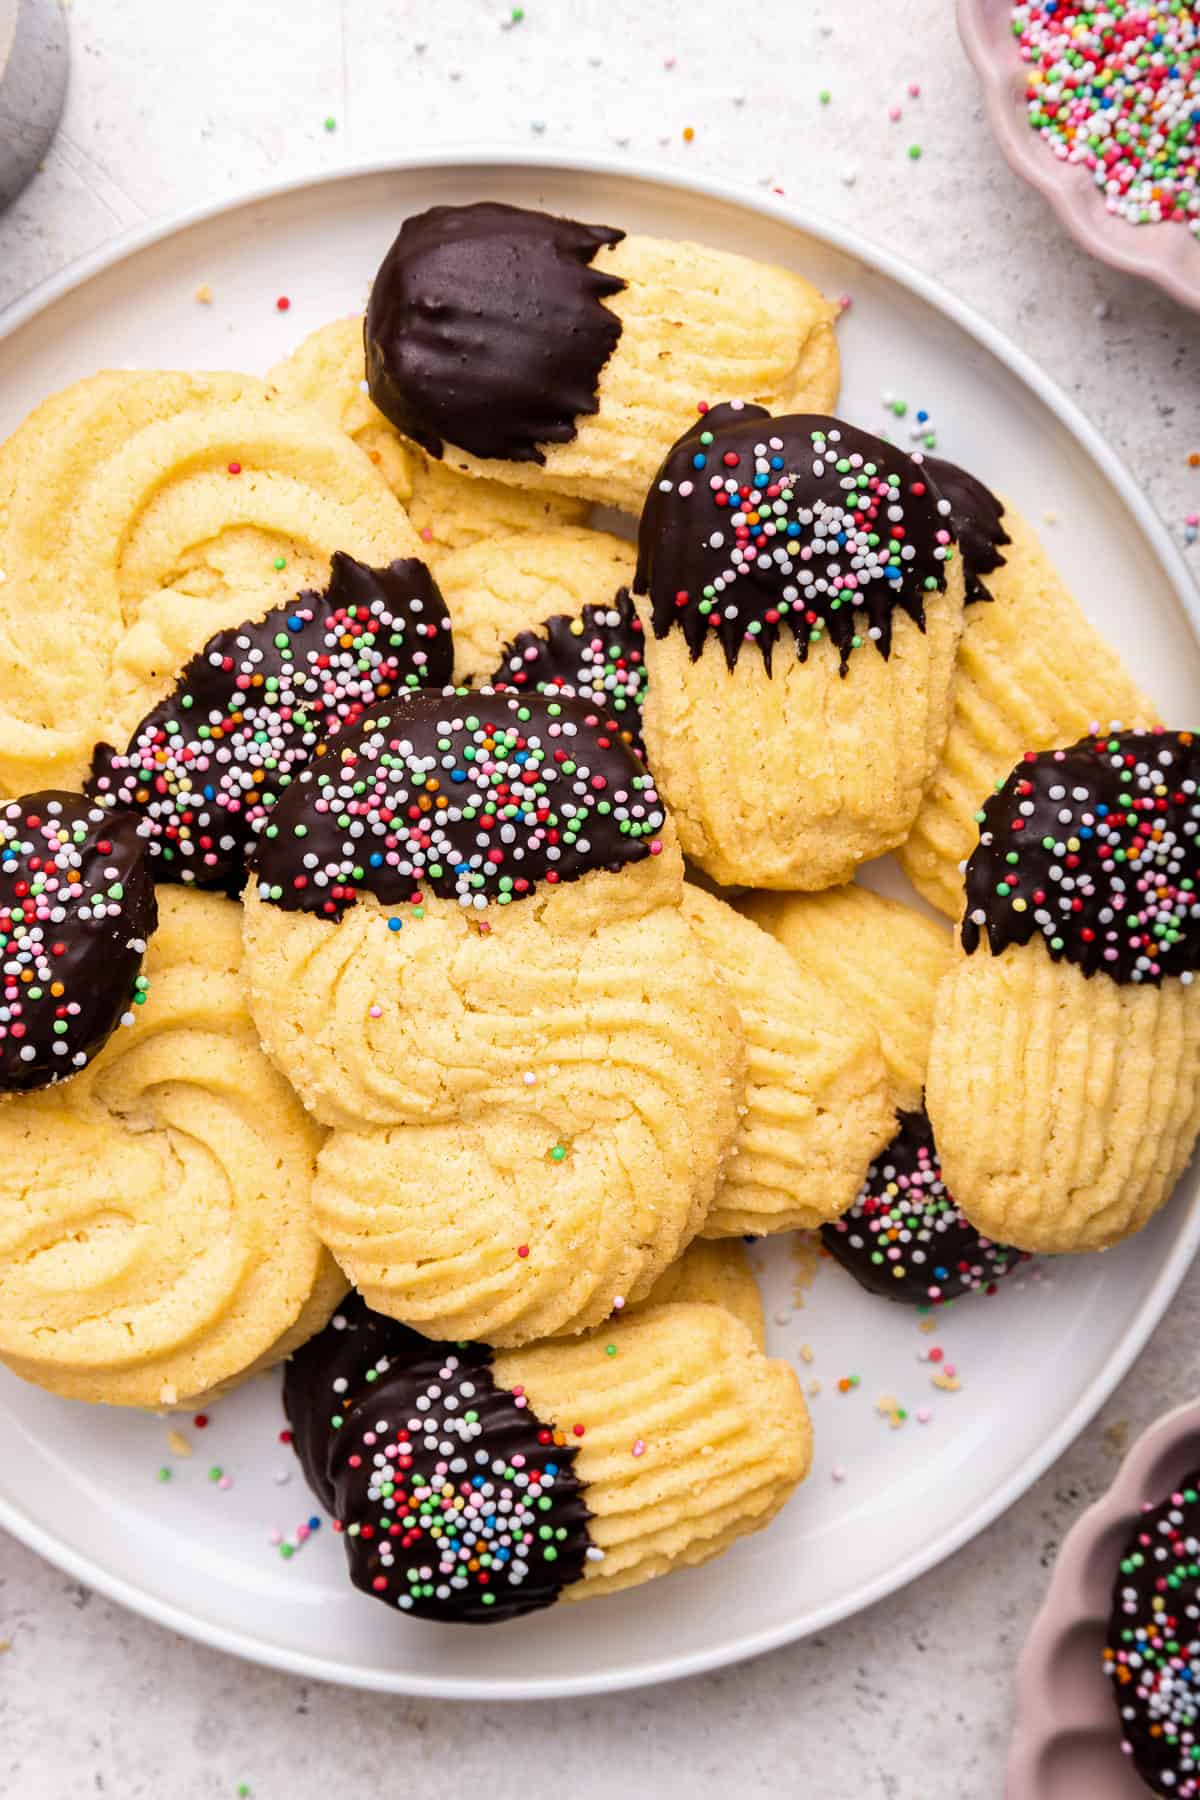 A plate of Italian butter cookies dipped in chocolate with colored nonpareils.